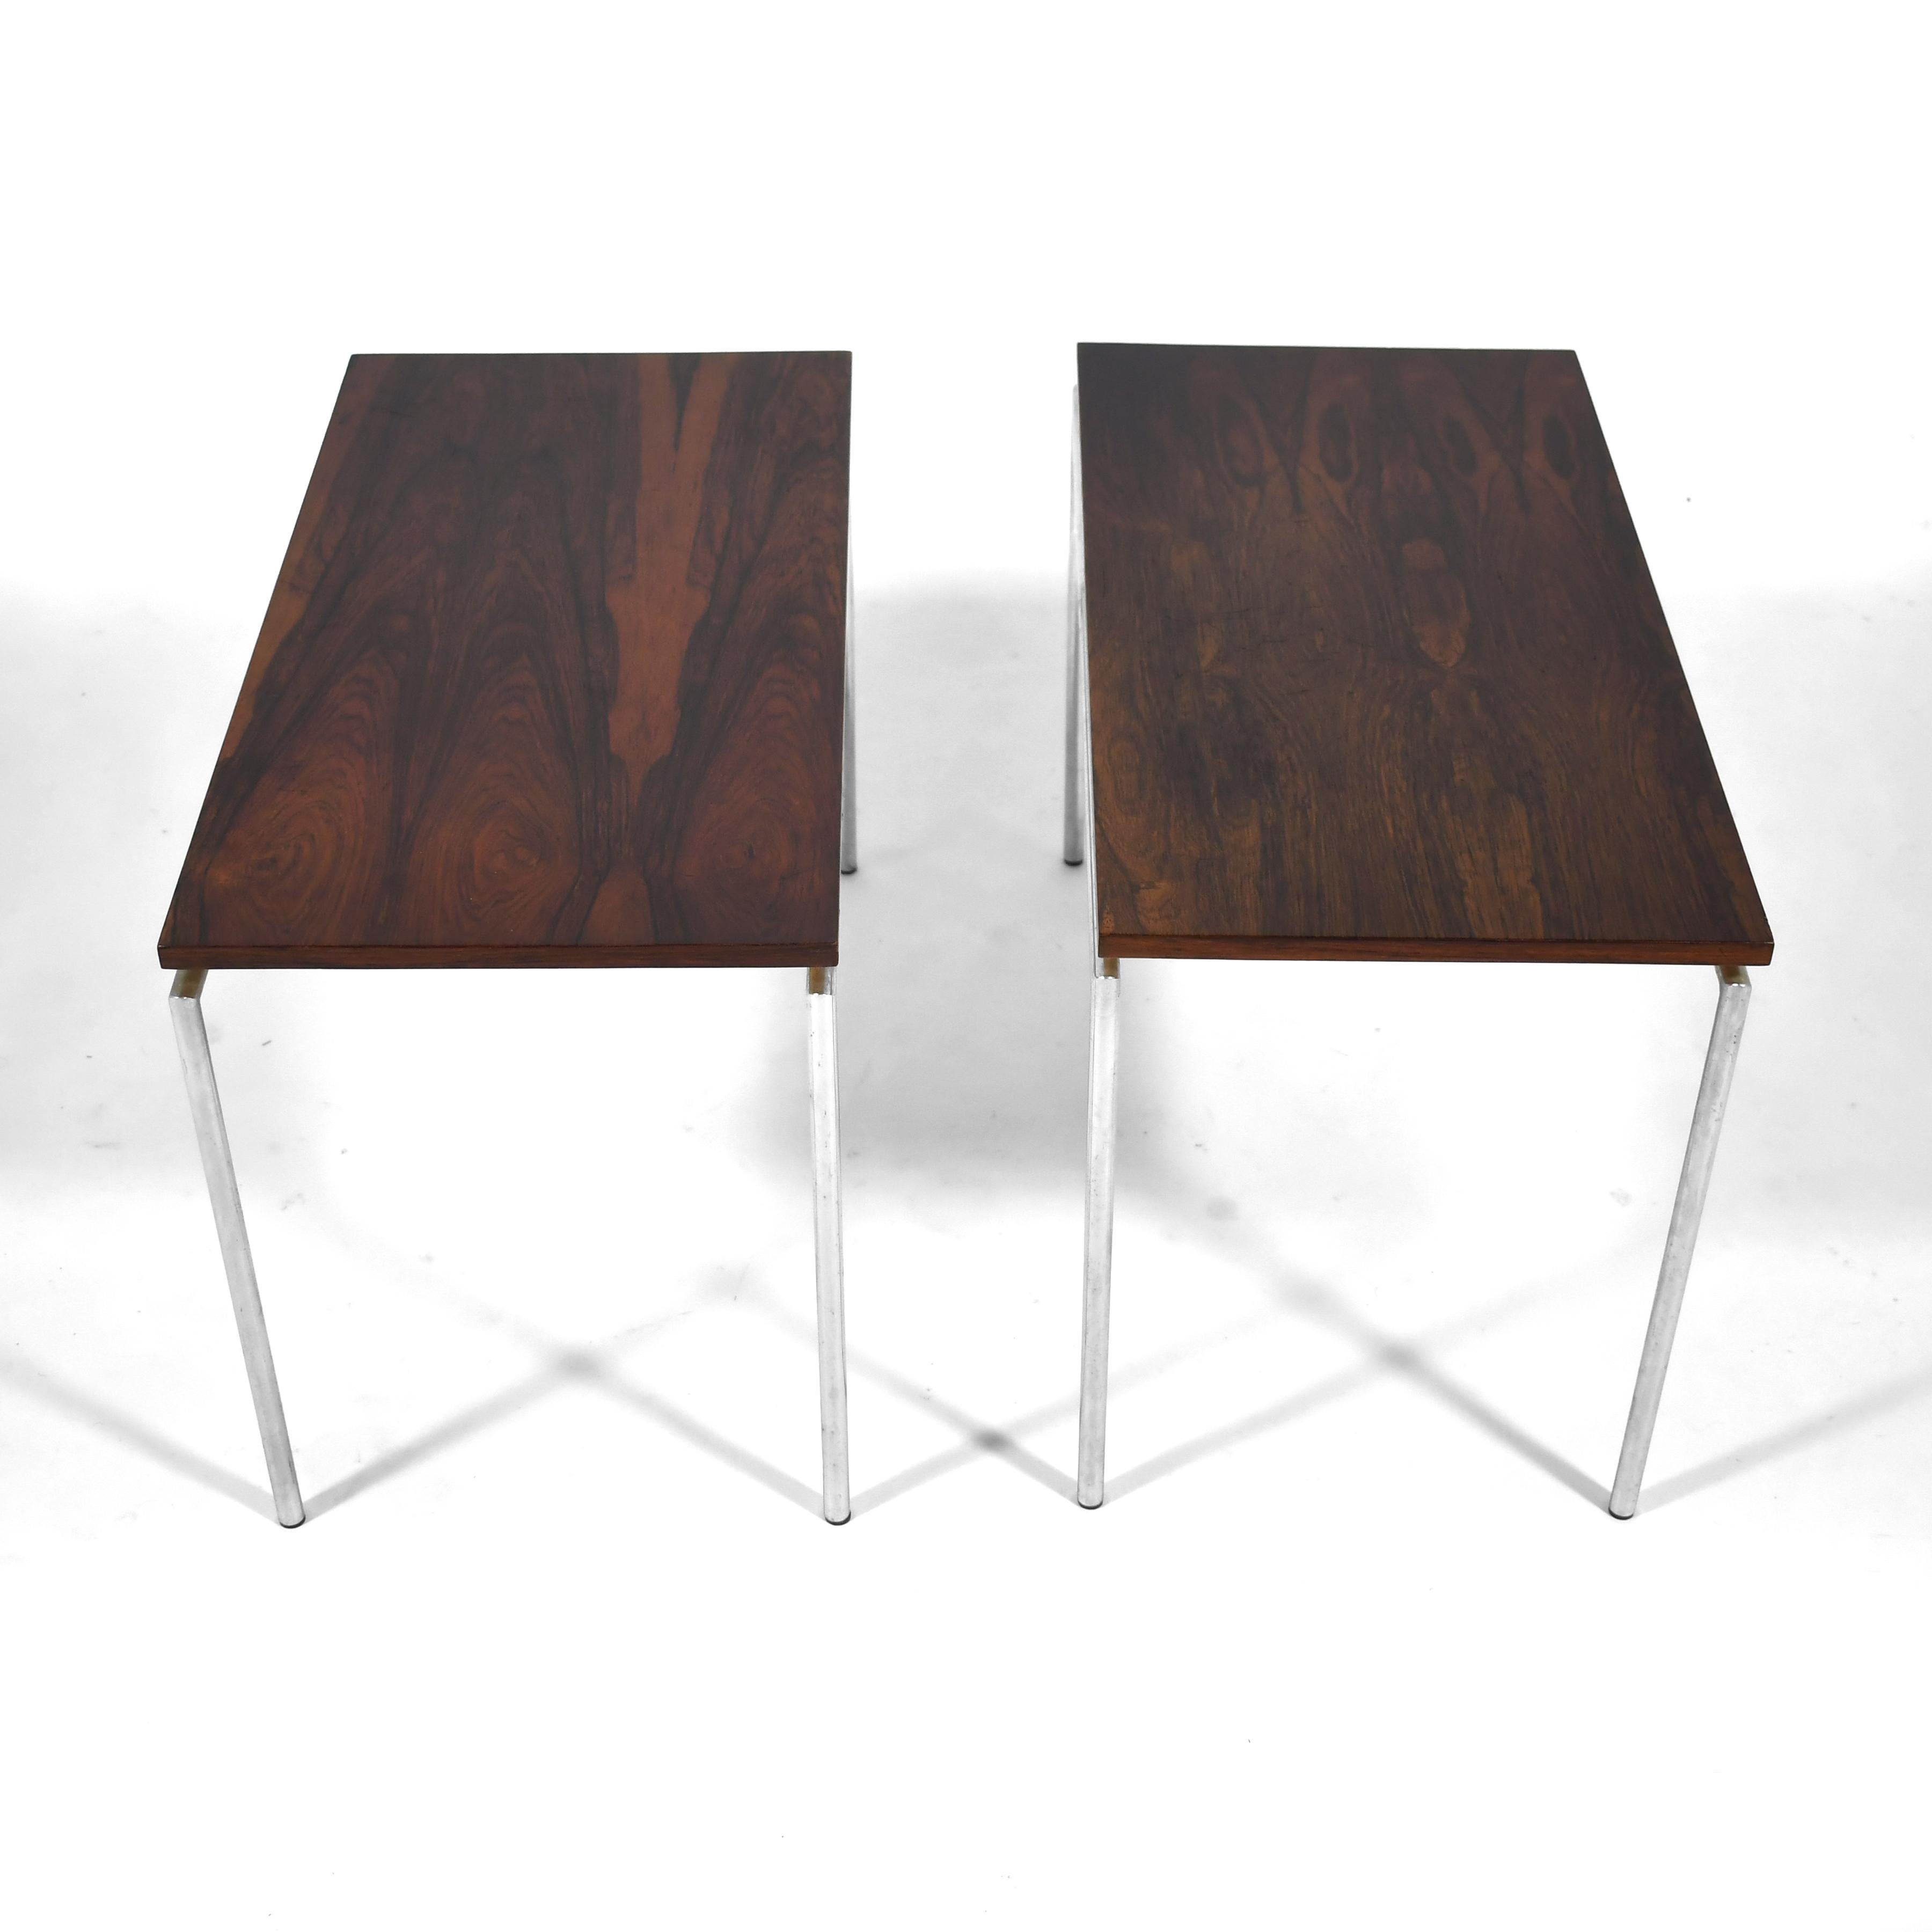 Scandinavian Modern Pair of Knud Joos Rosewood Tables by Jason Mobler For Sale